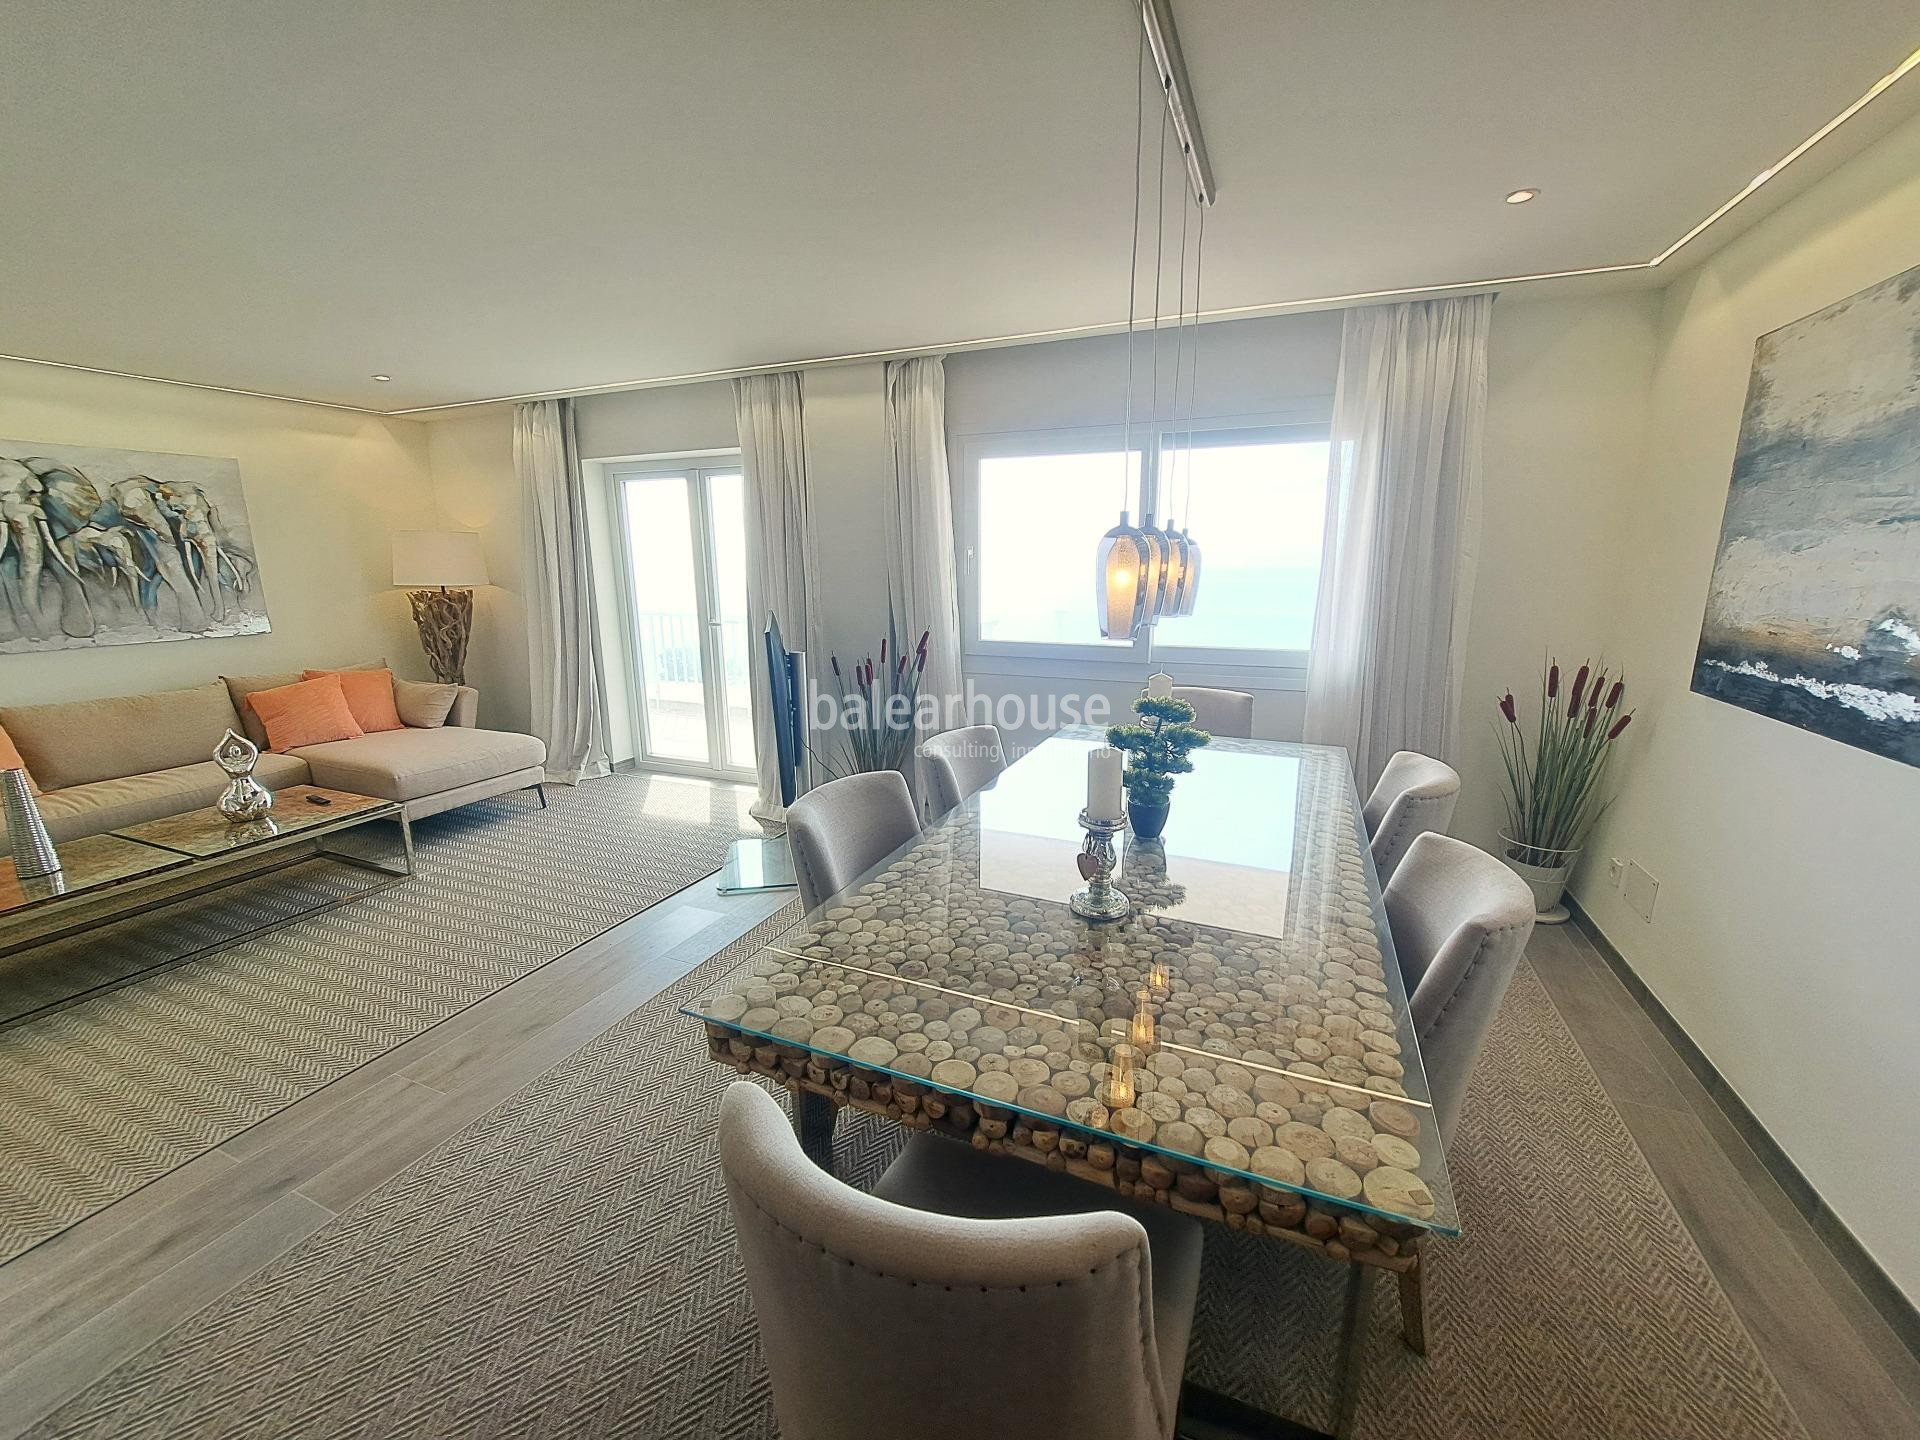 Renovated flat with large terrace and spectacular sea views, just a few steps from the beach.